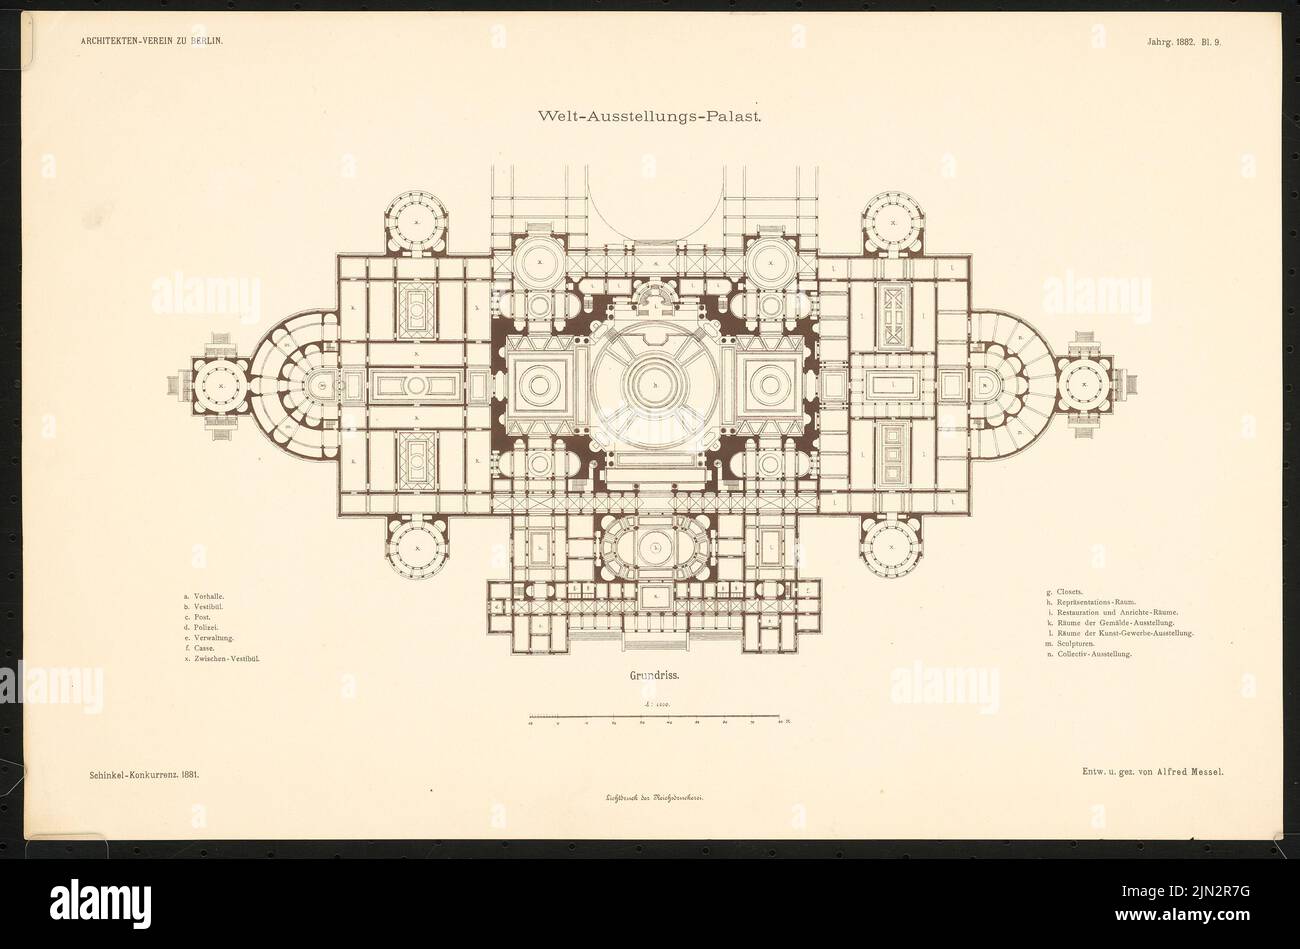 Messel Alfred (1853-1909): World Exhibition Palace, Berlin. Schinkel competition 1881. In: Designs by members of the Architects' Association in Berlin, new episode, born 1882, sheet 9 Stock Photo